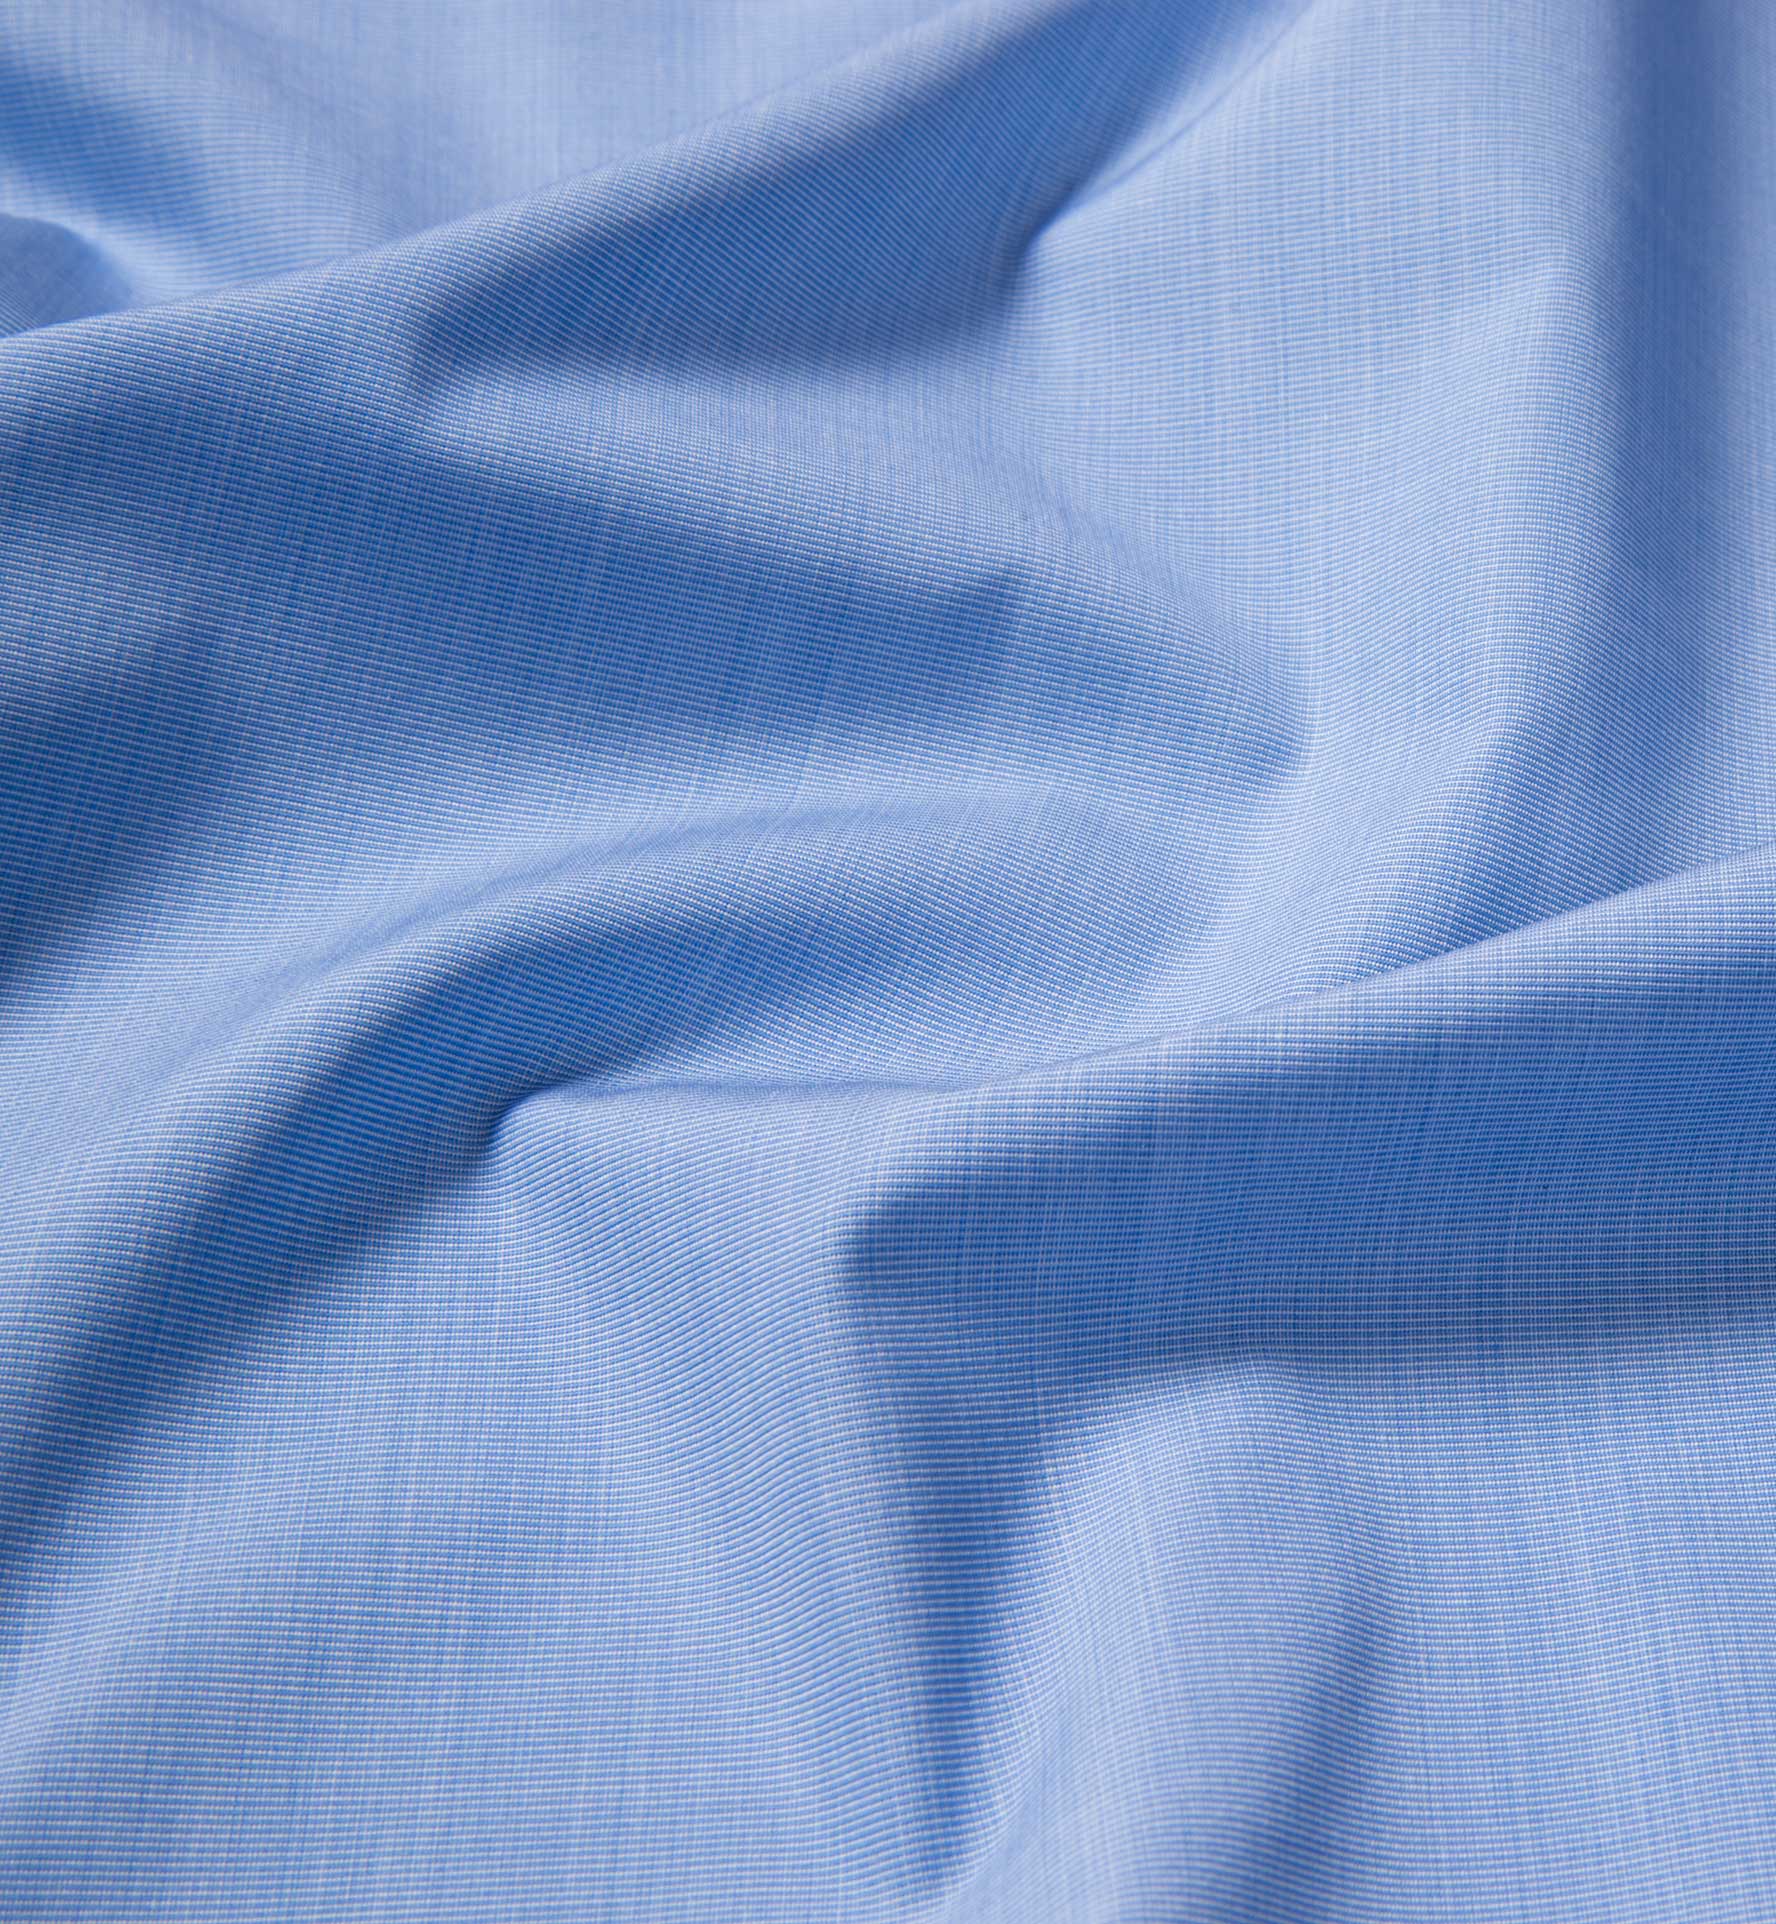 Stanton 120s Blue End-on-End Shirts by Proper Cloth